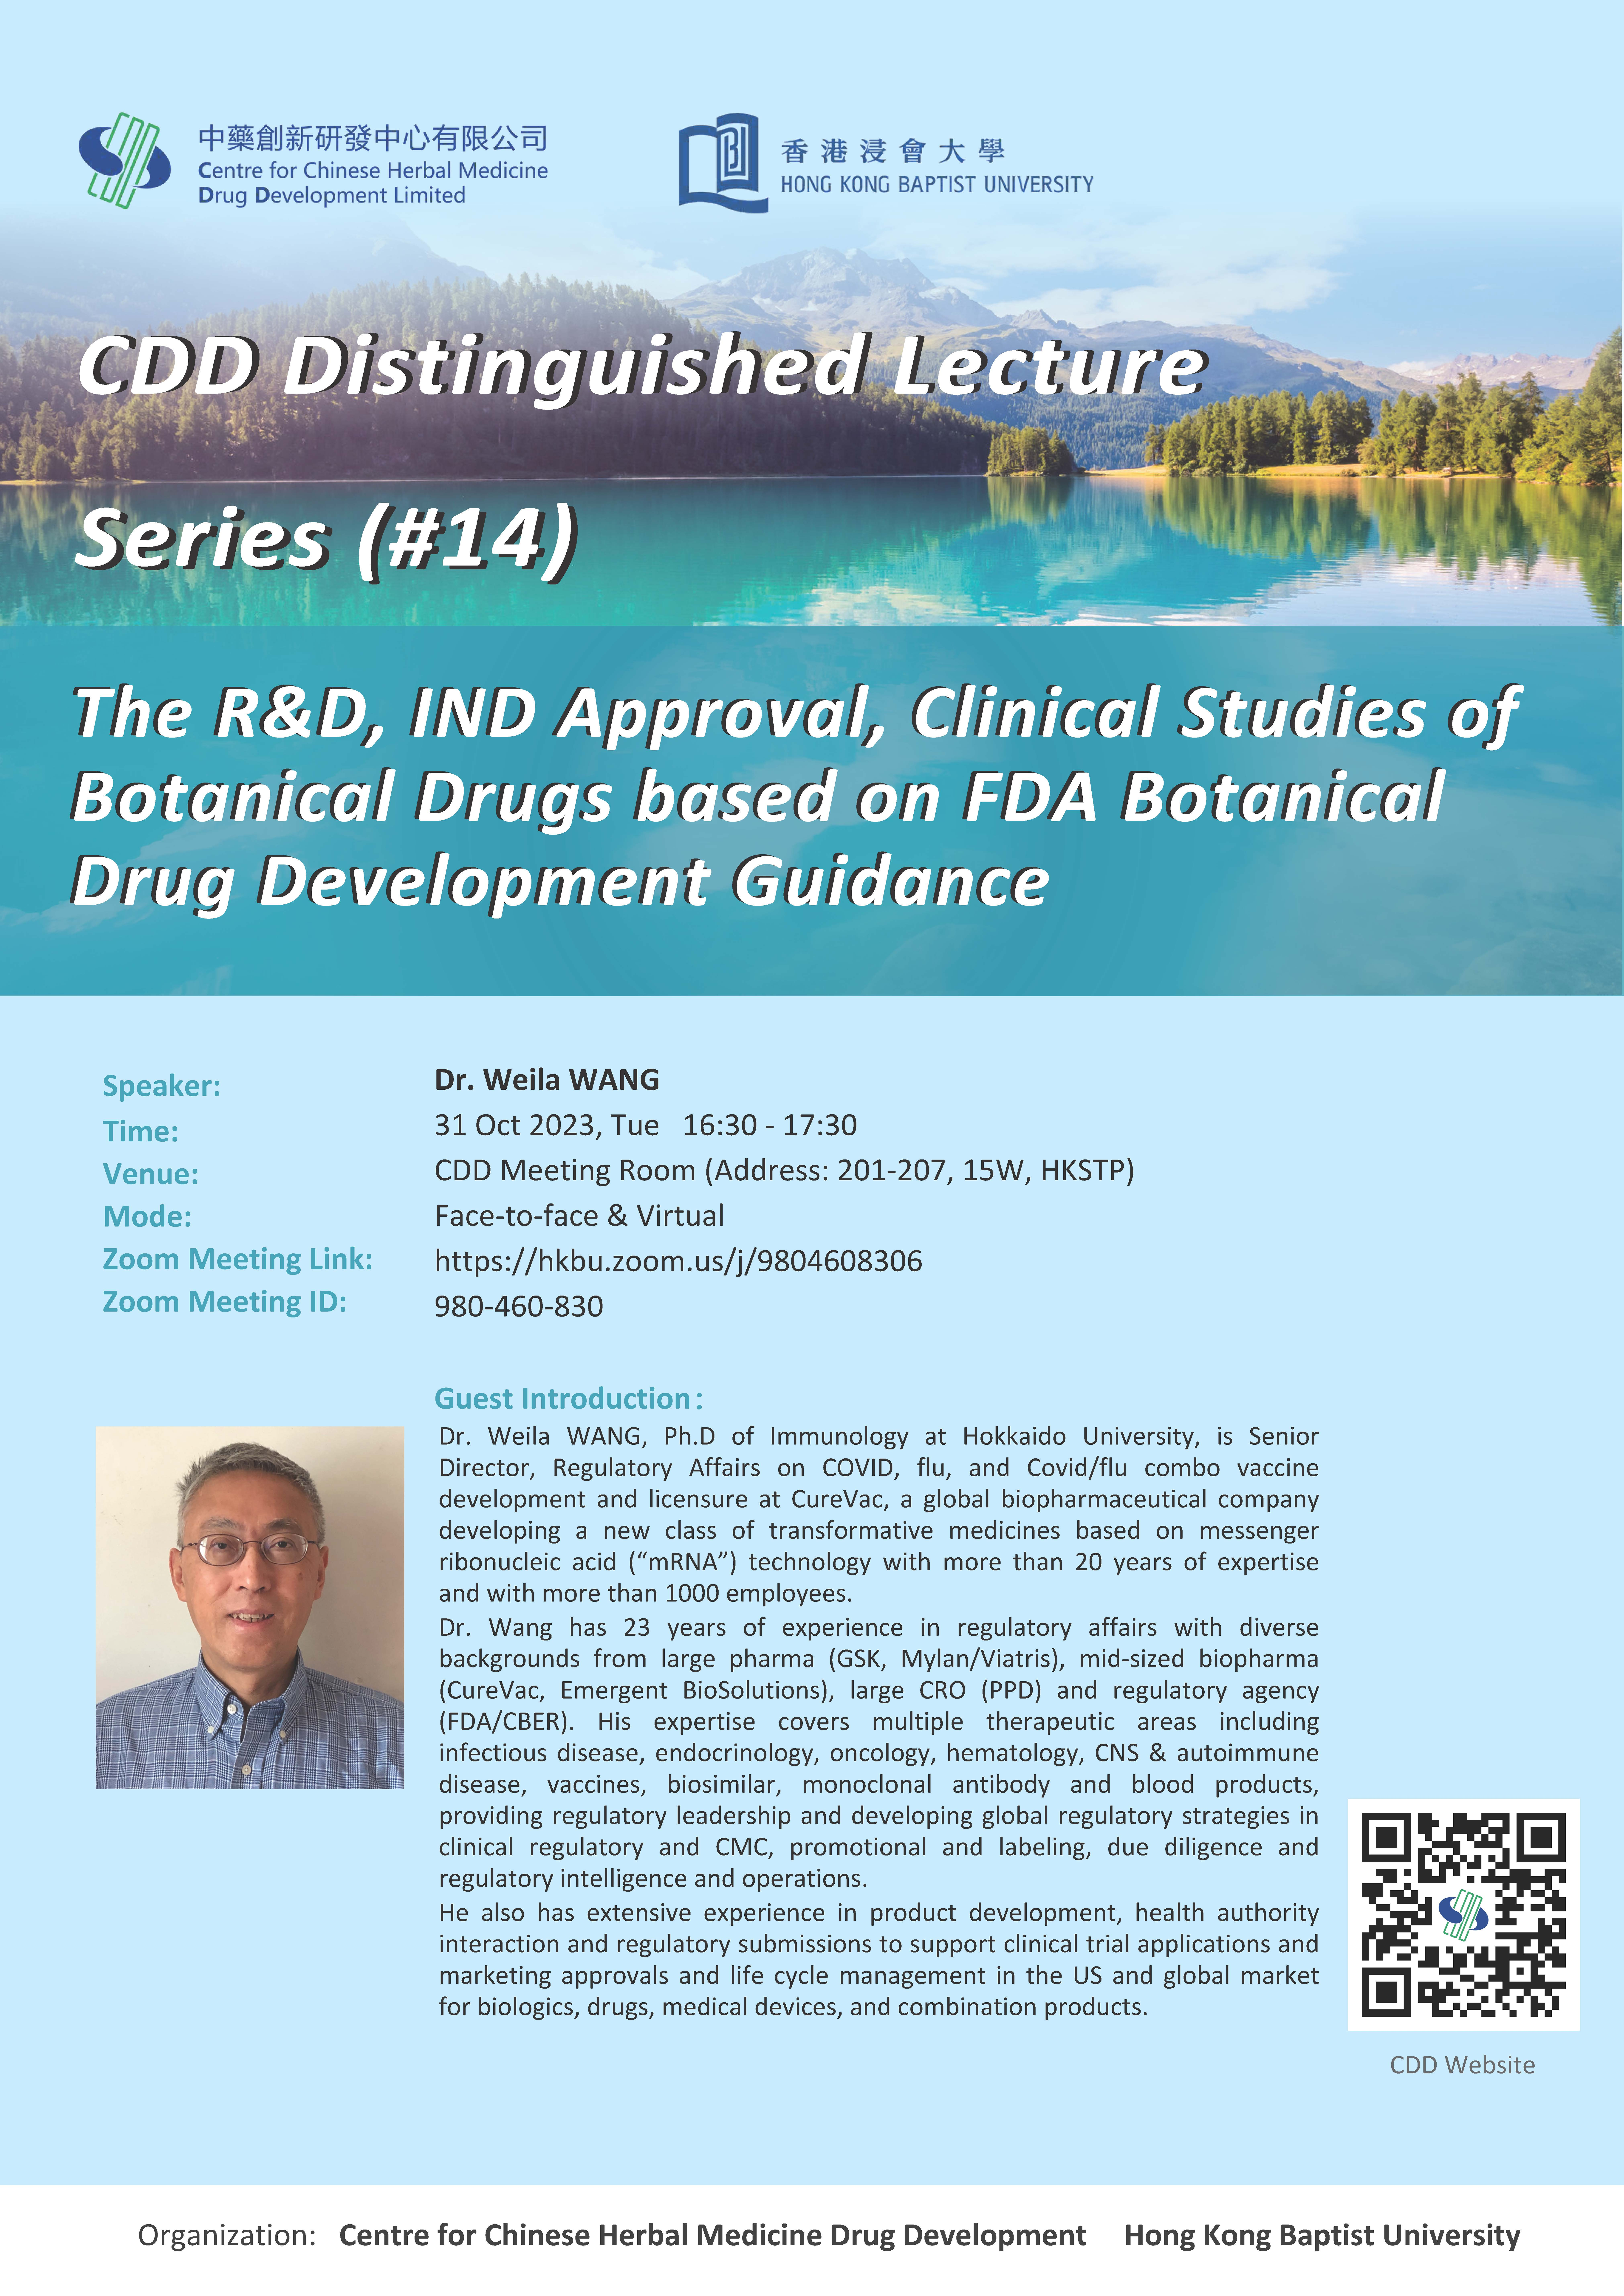 CDD Distinguished Lecture Series 14(By Dr. Weila WANG)